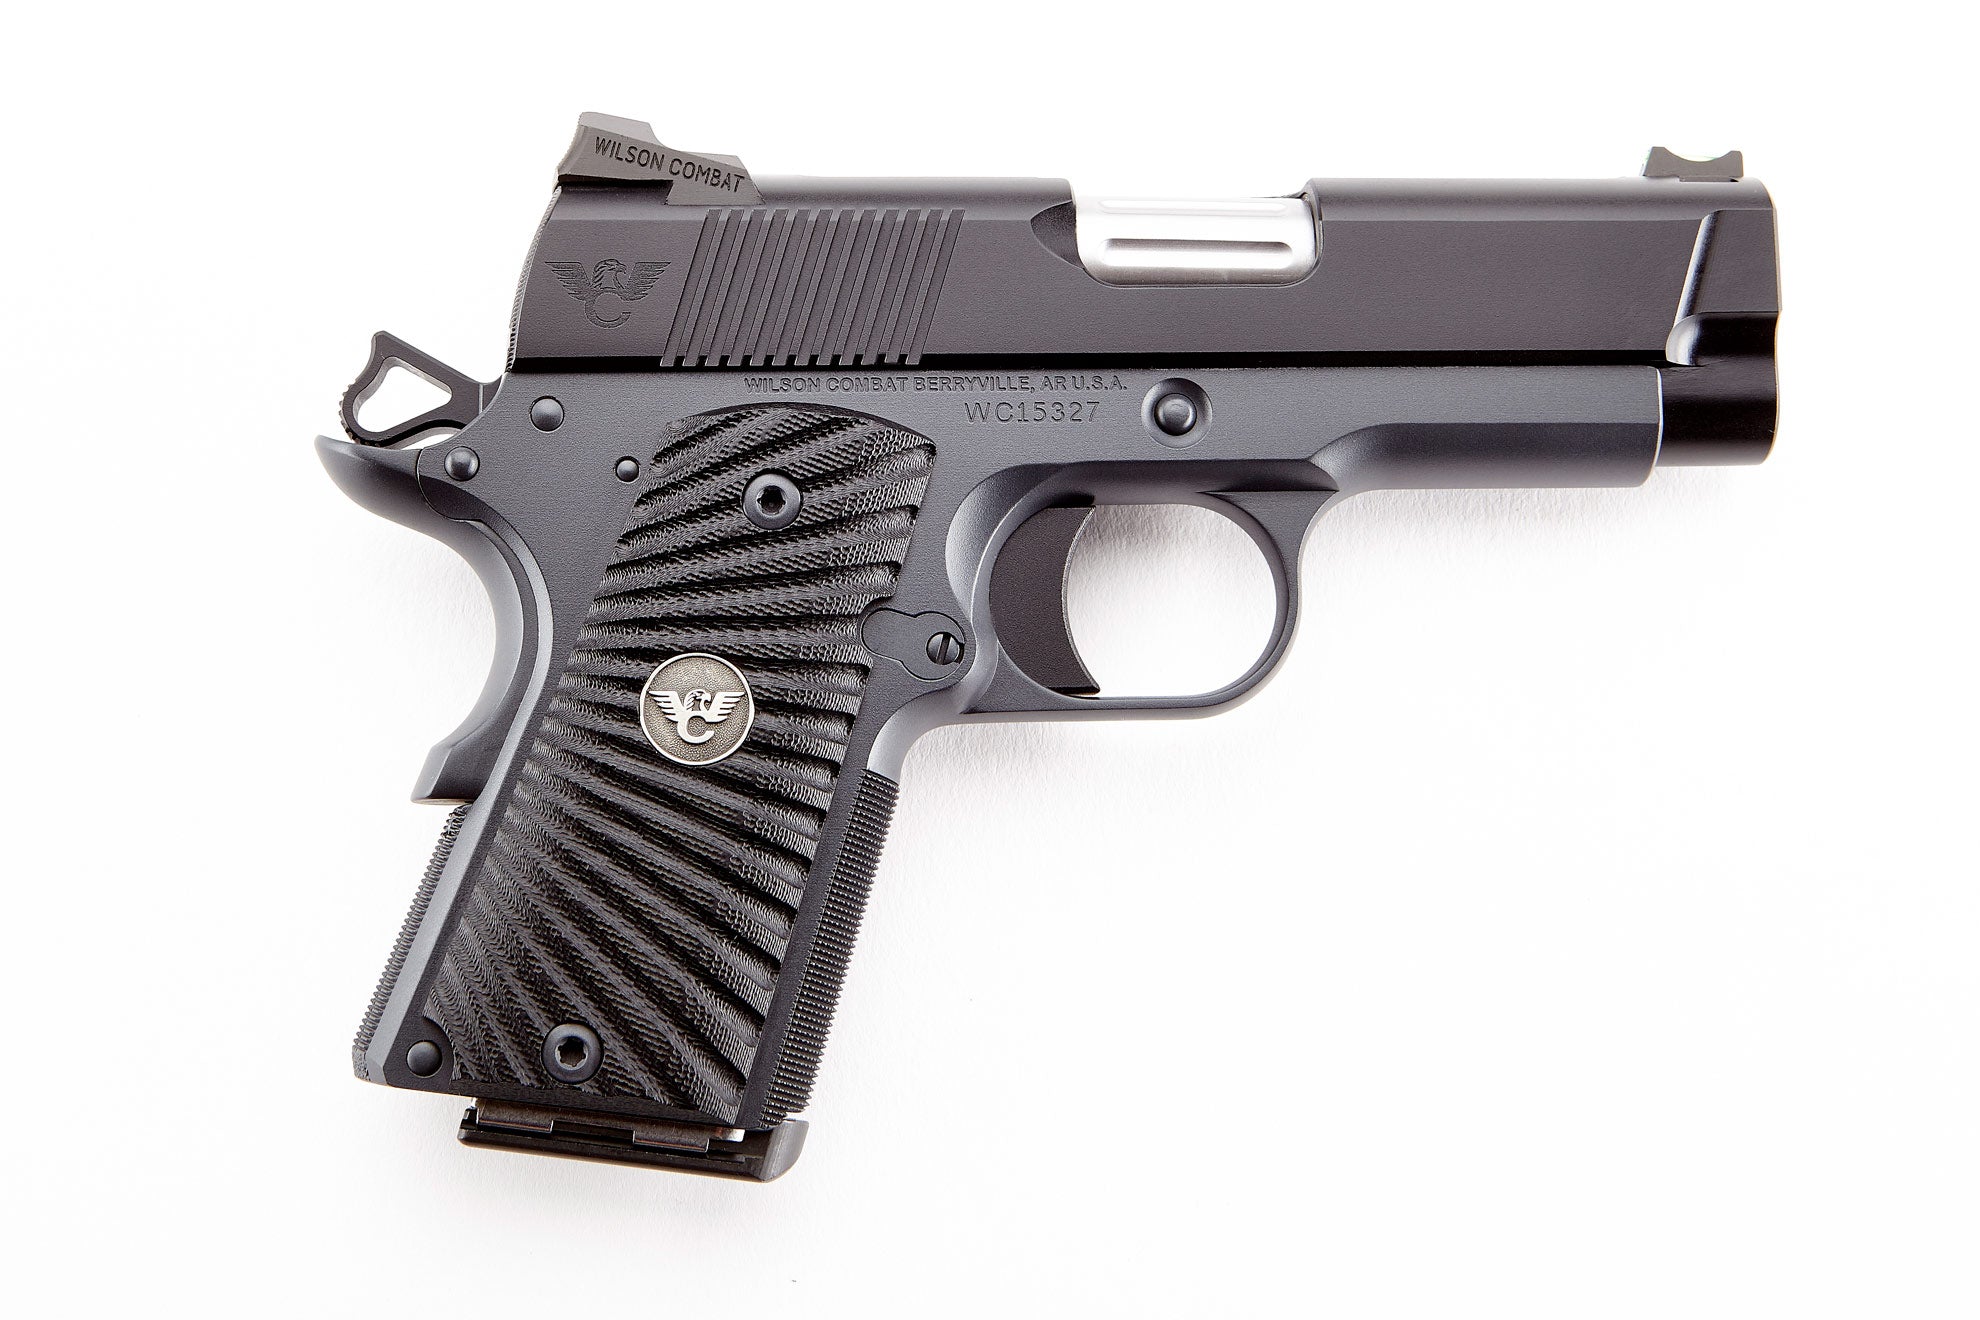 Wilson Combat Super Sentinel Review: Pros and cons of the Super Sentinel